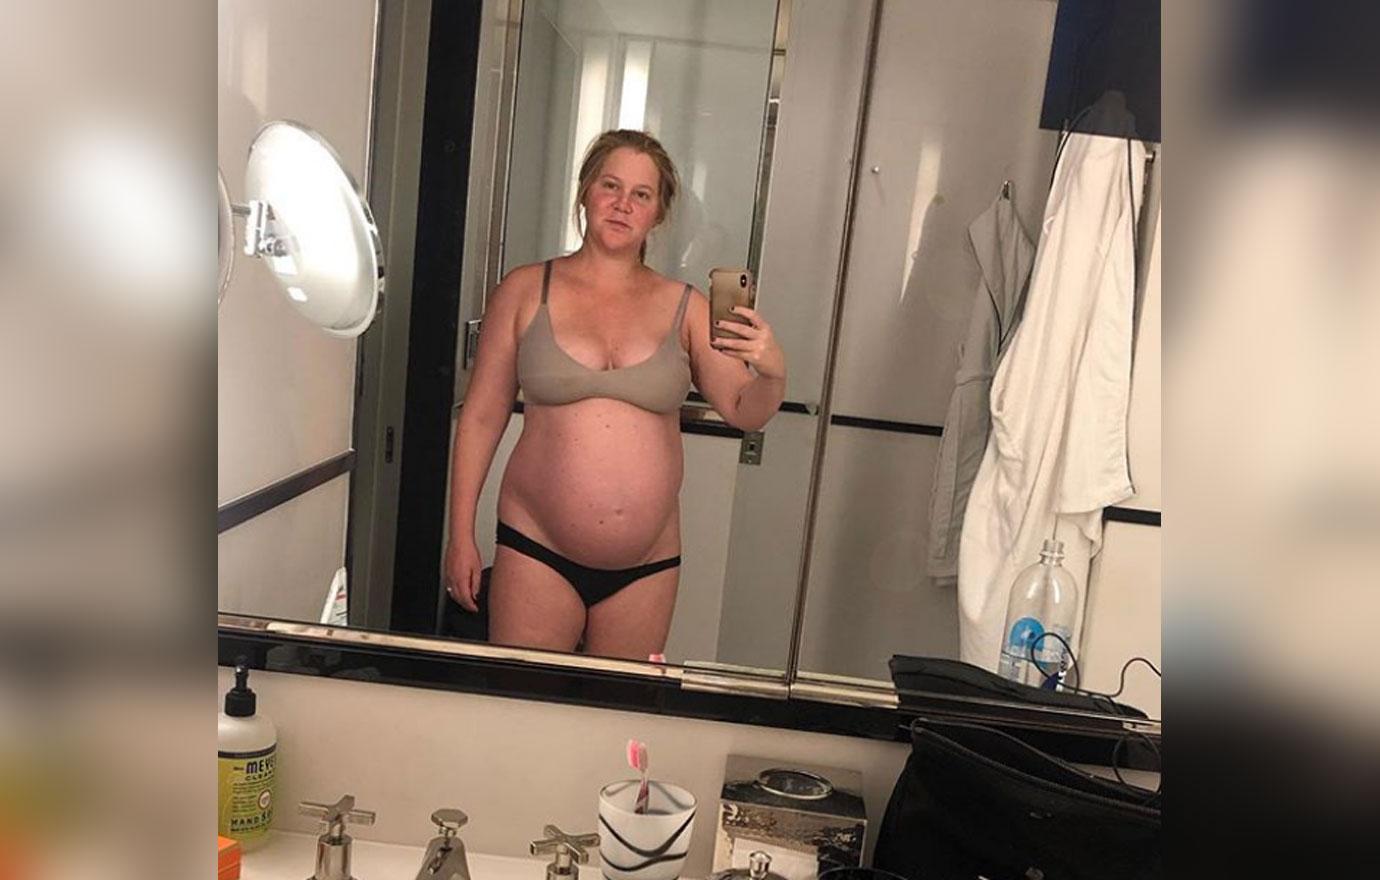 charlie ybanez recommends Amy Schumer Nude Selfie